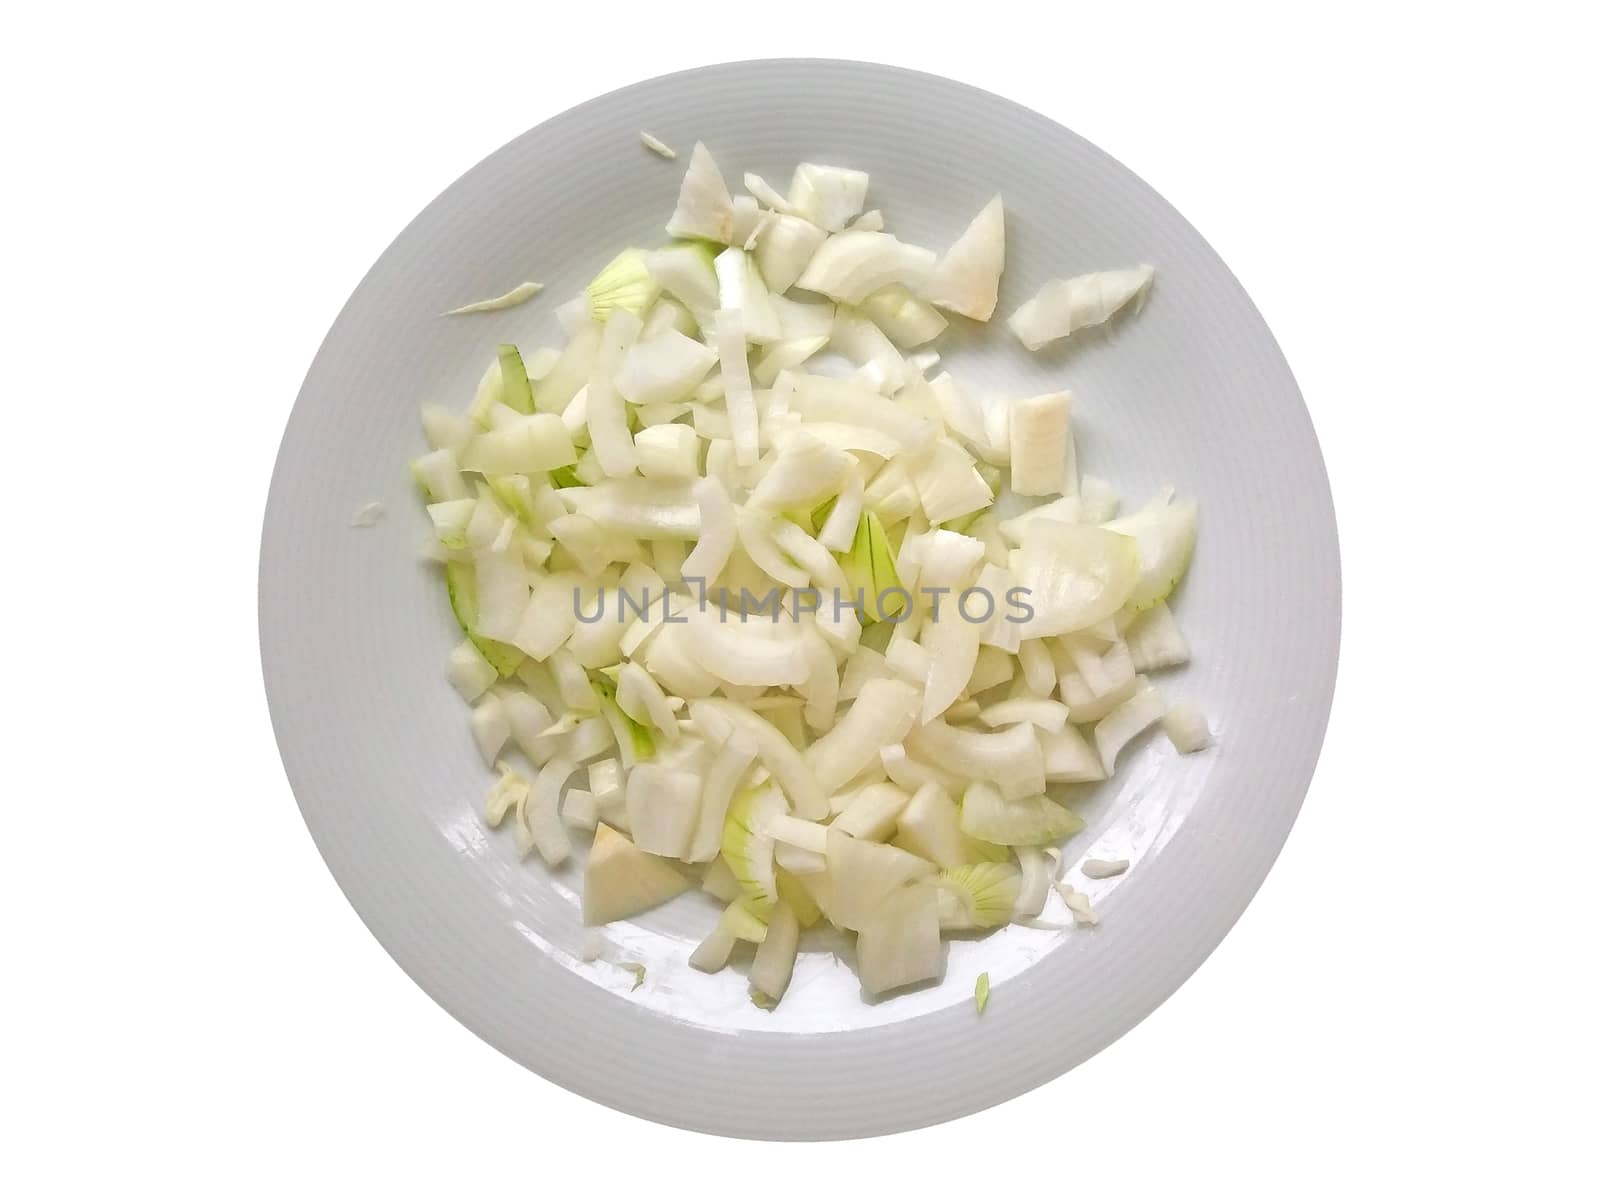 Onion cut off into a plate on white background